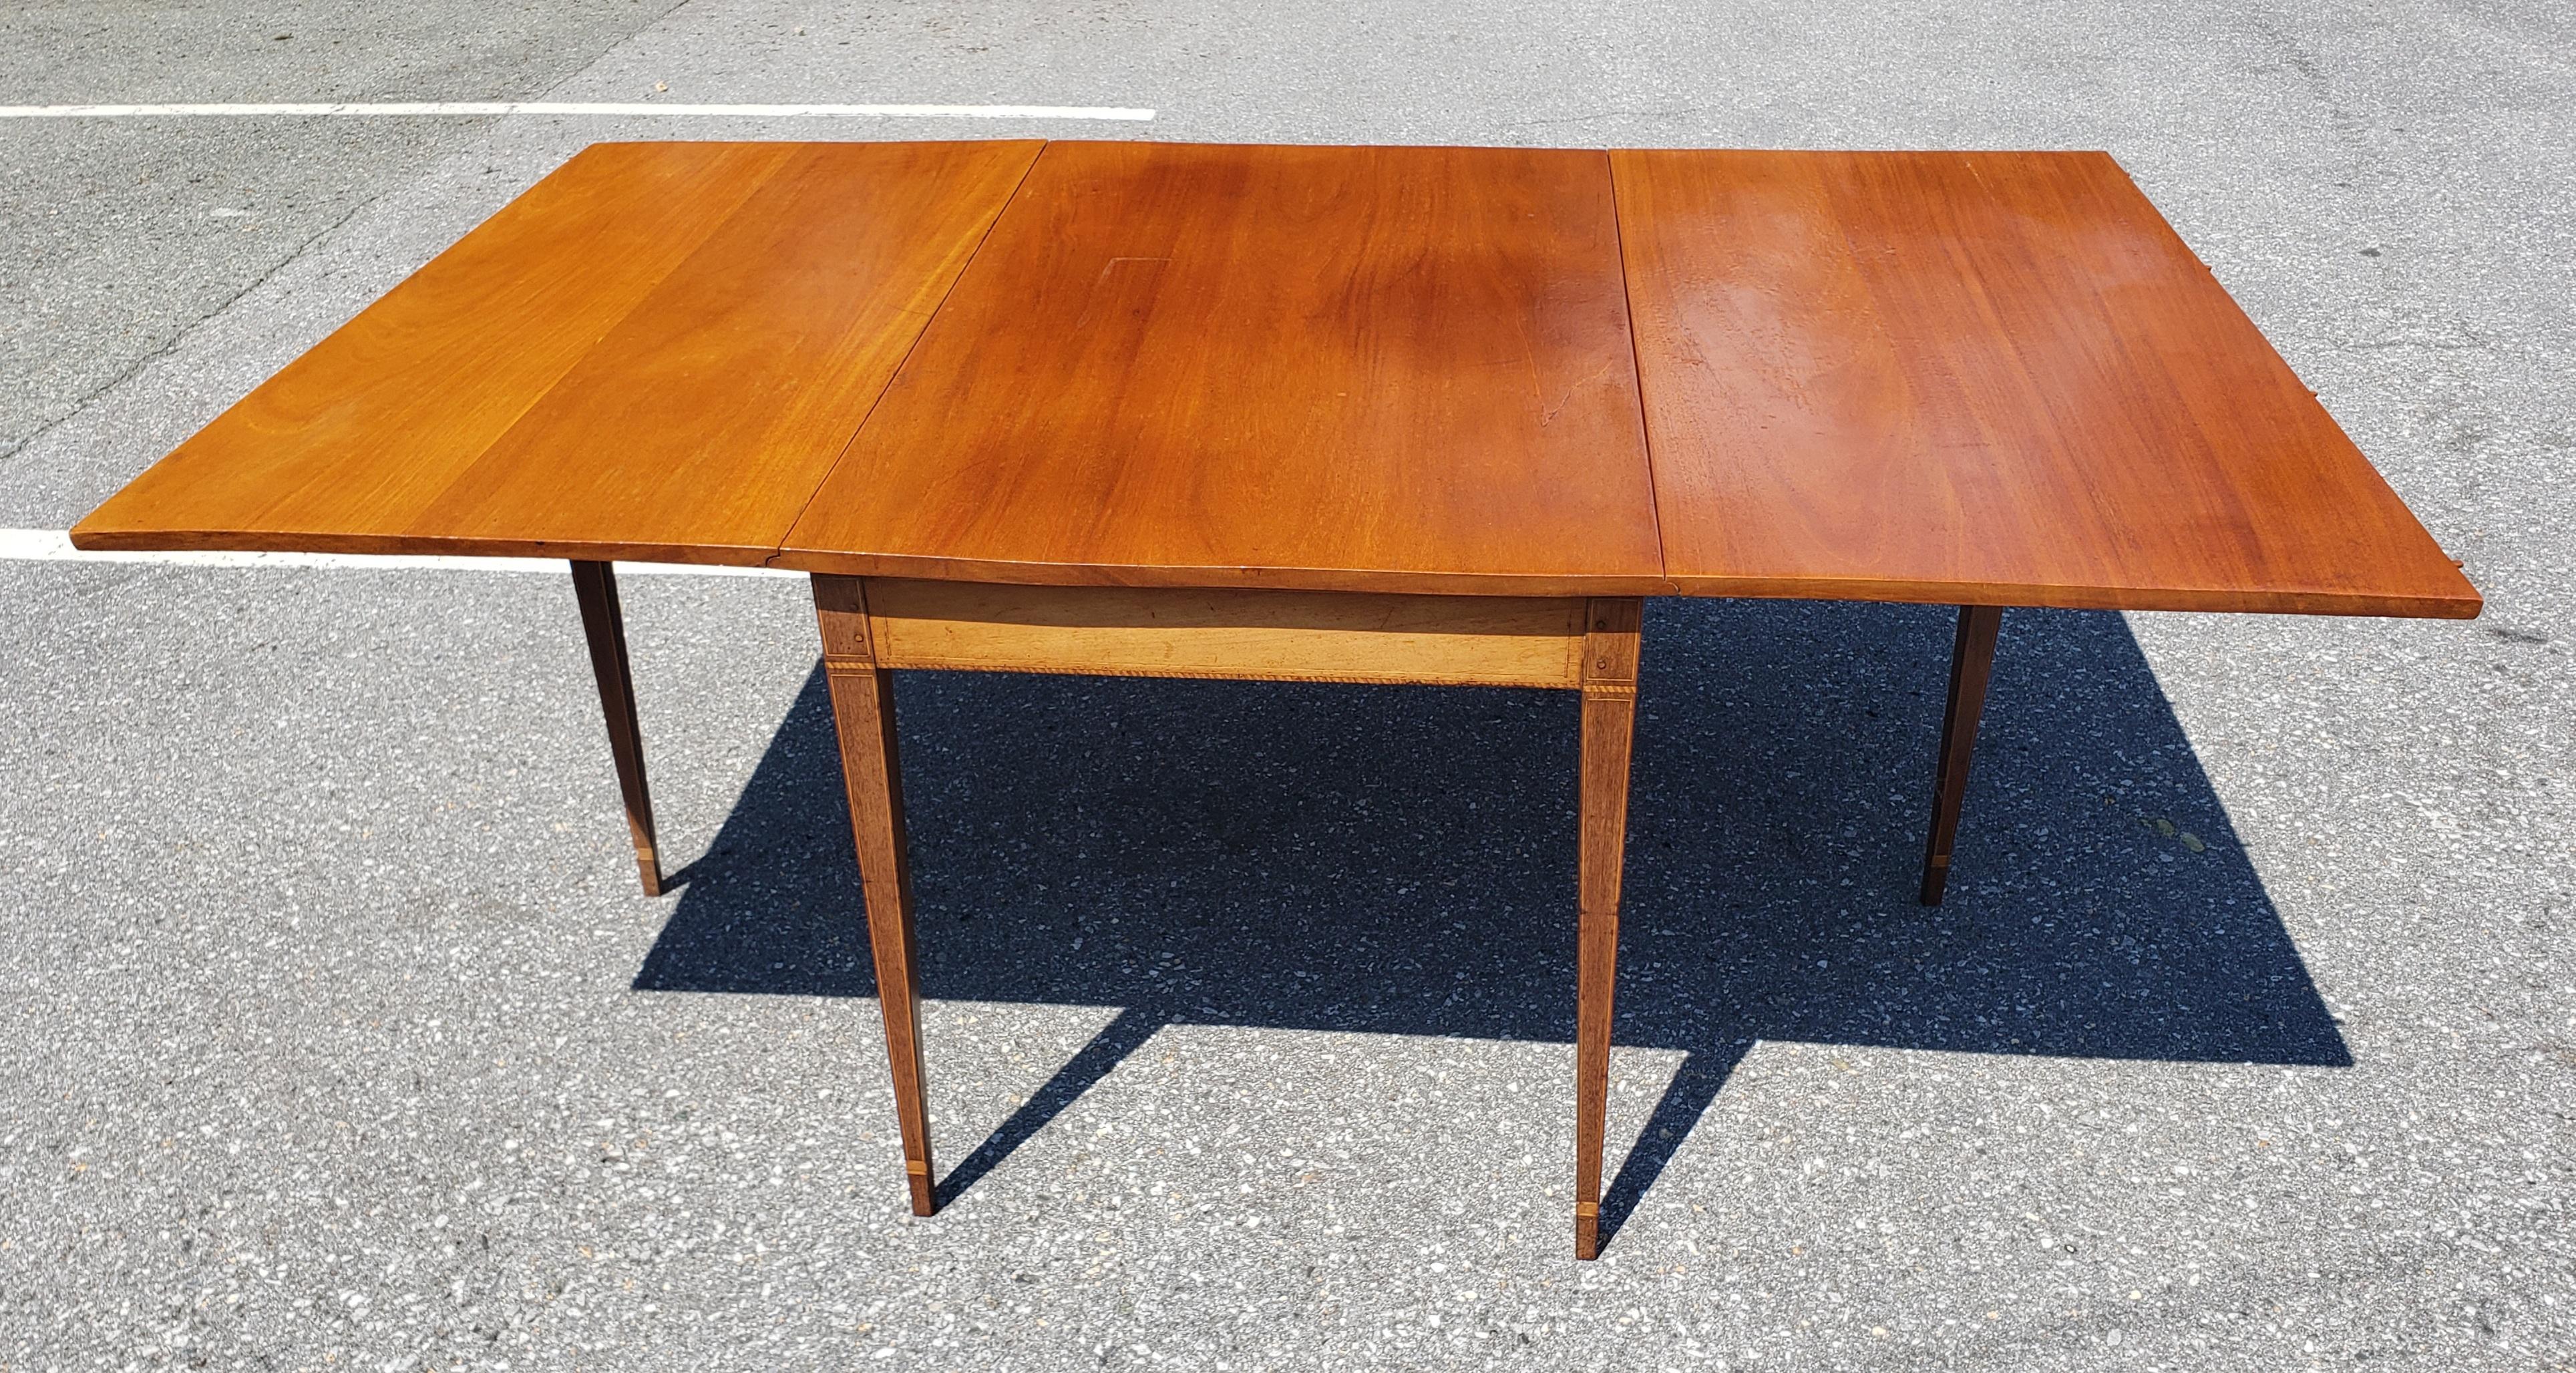 1930s American Federal Mahogany And Satinwood Inlay Drop-Leaf Dining Table In Good Condition For Sale In Germantown, MD